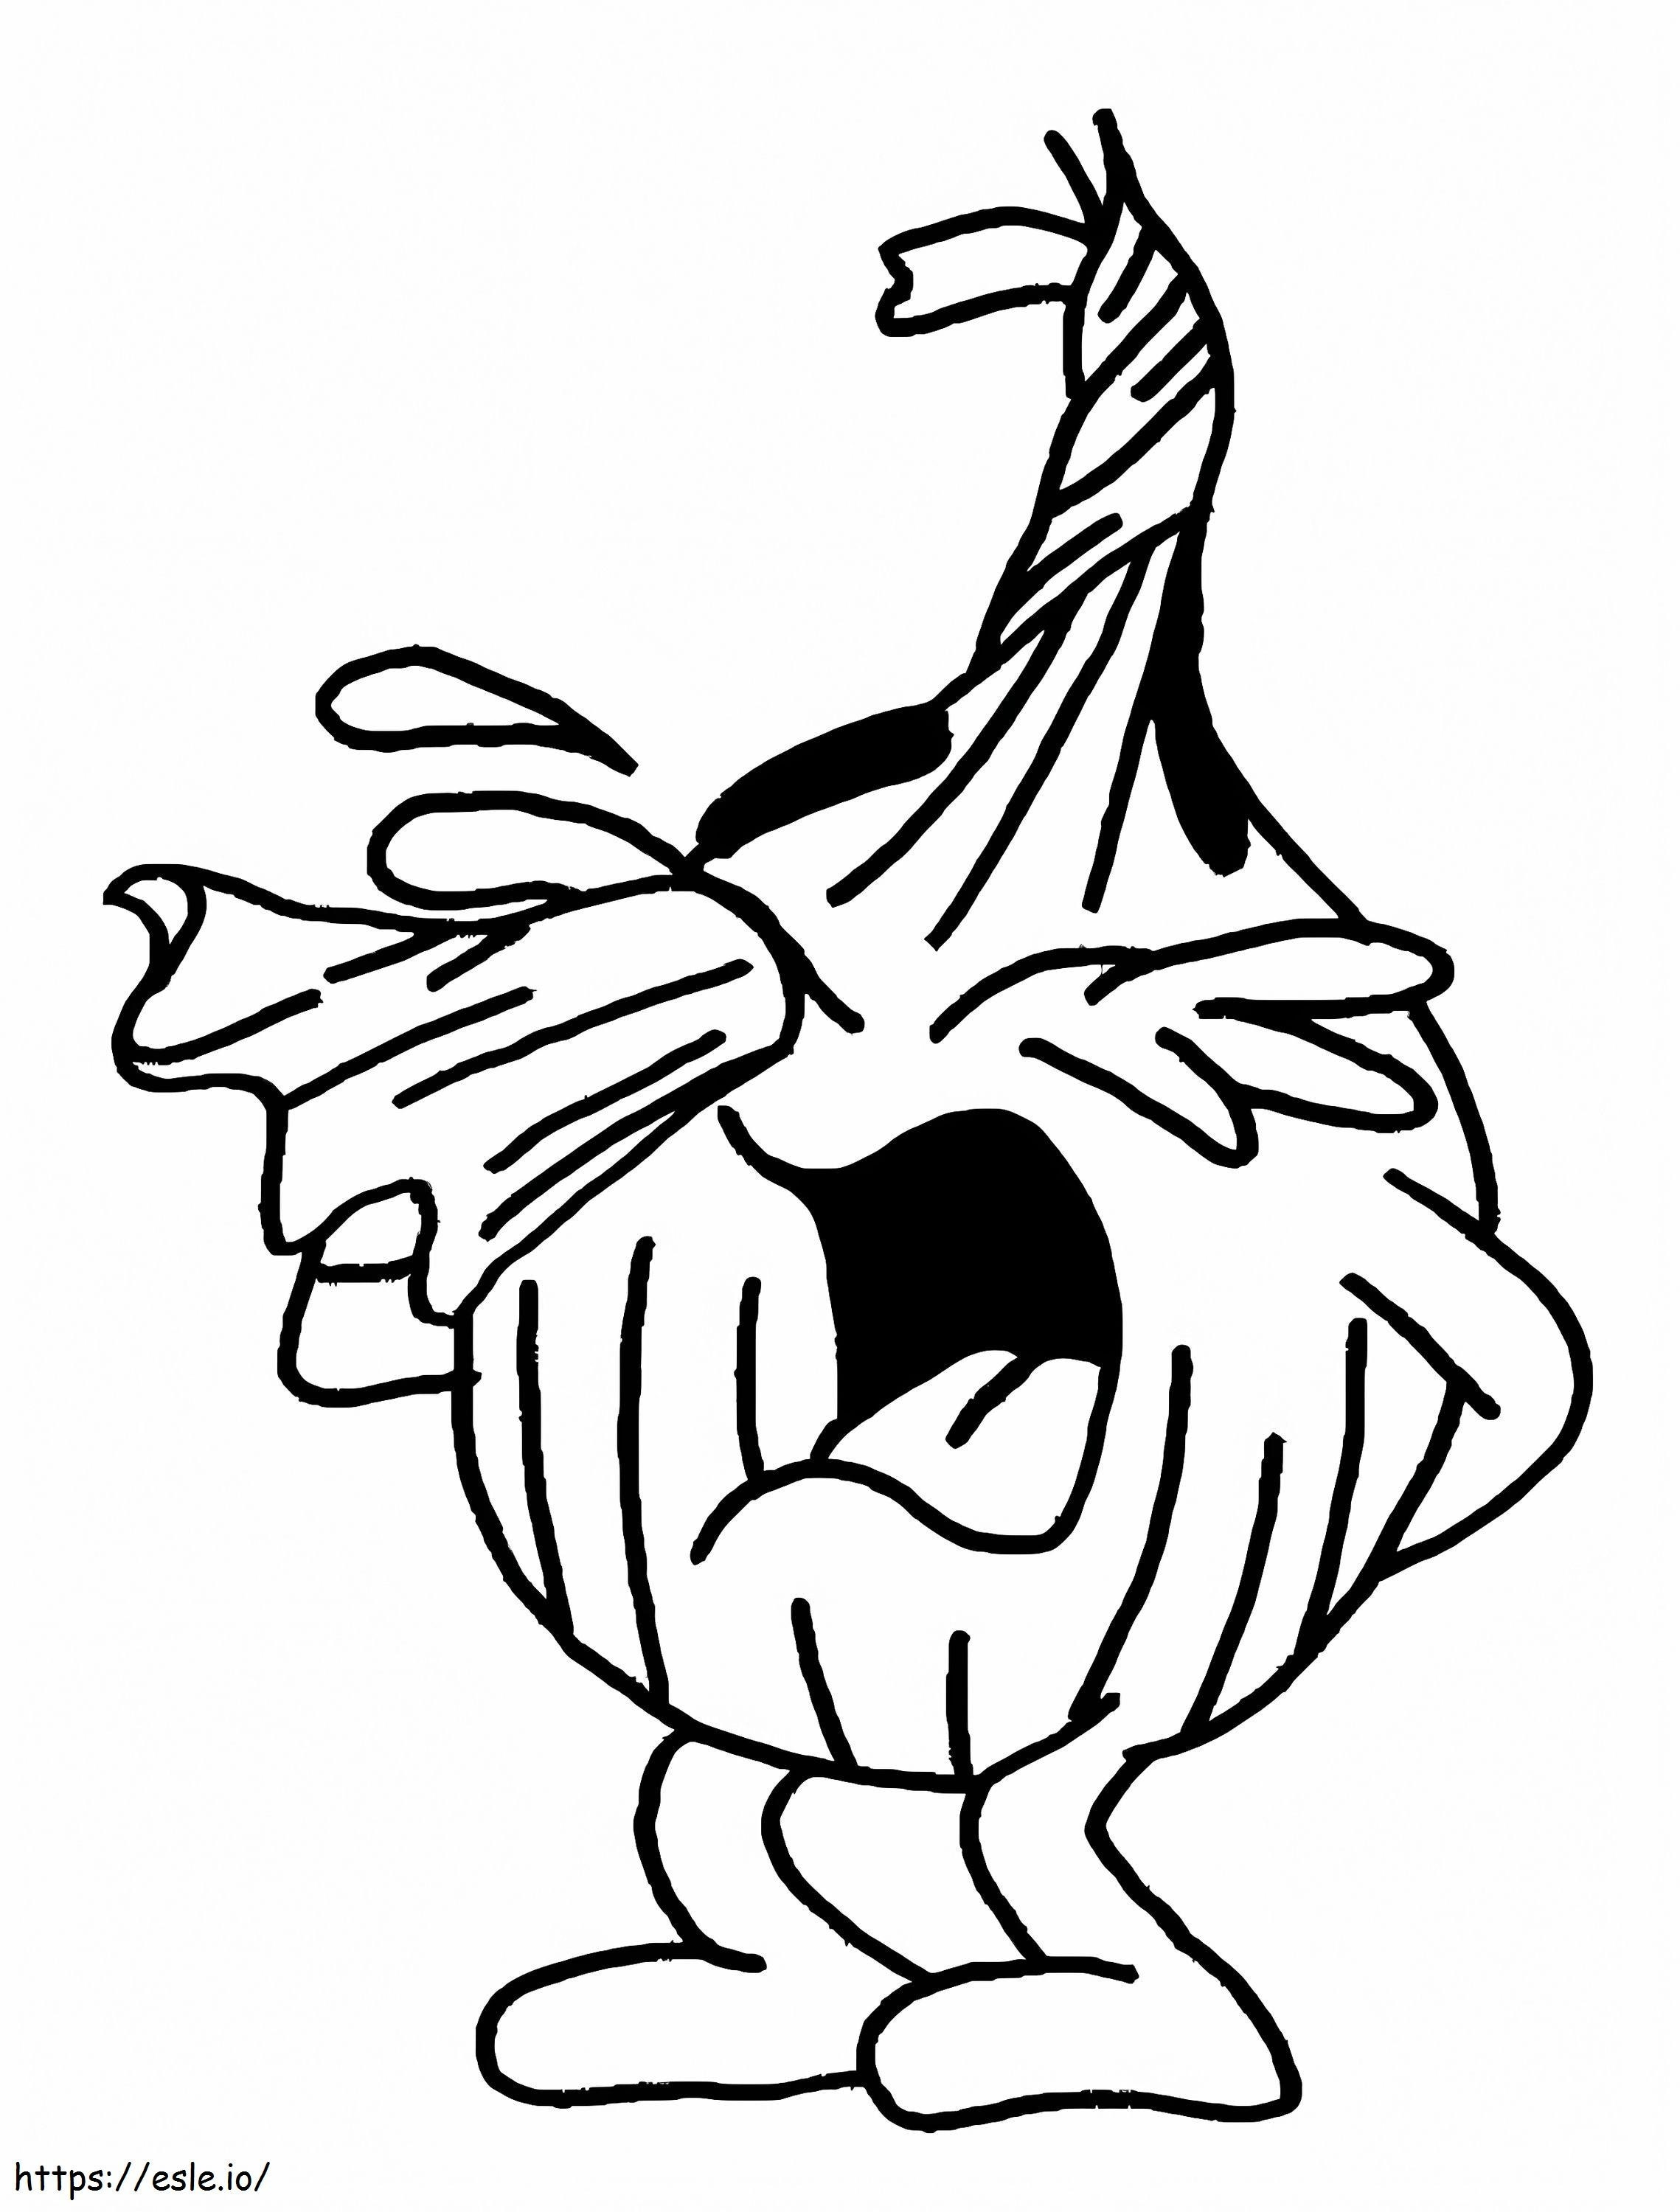 Onion Cries coloring page